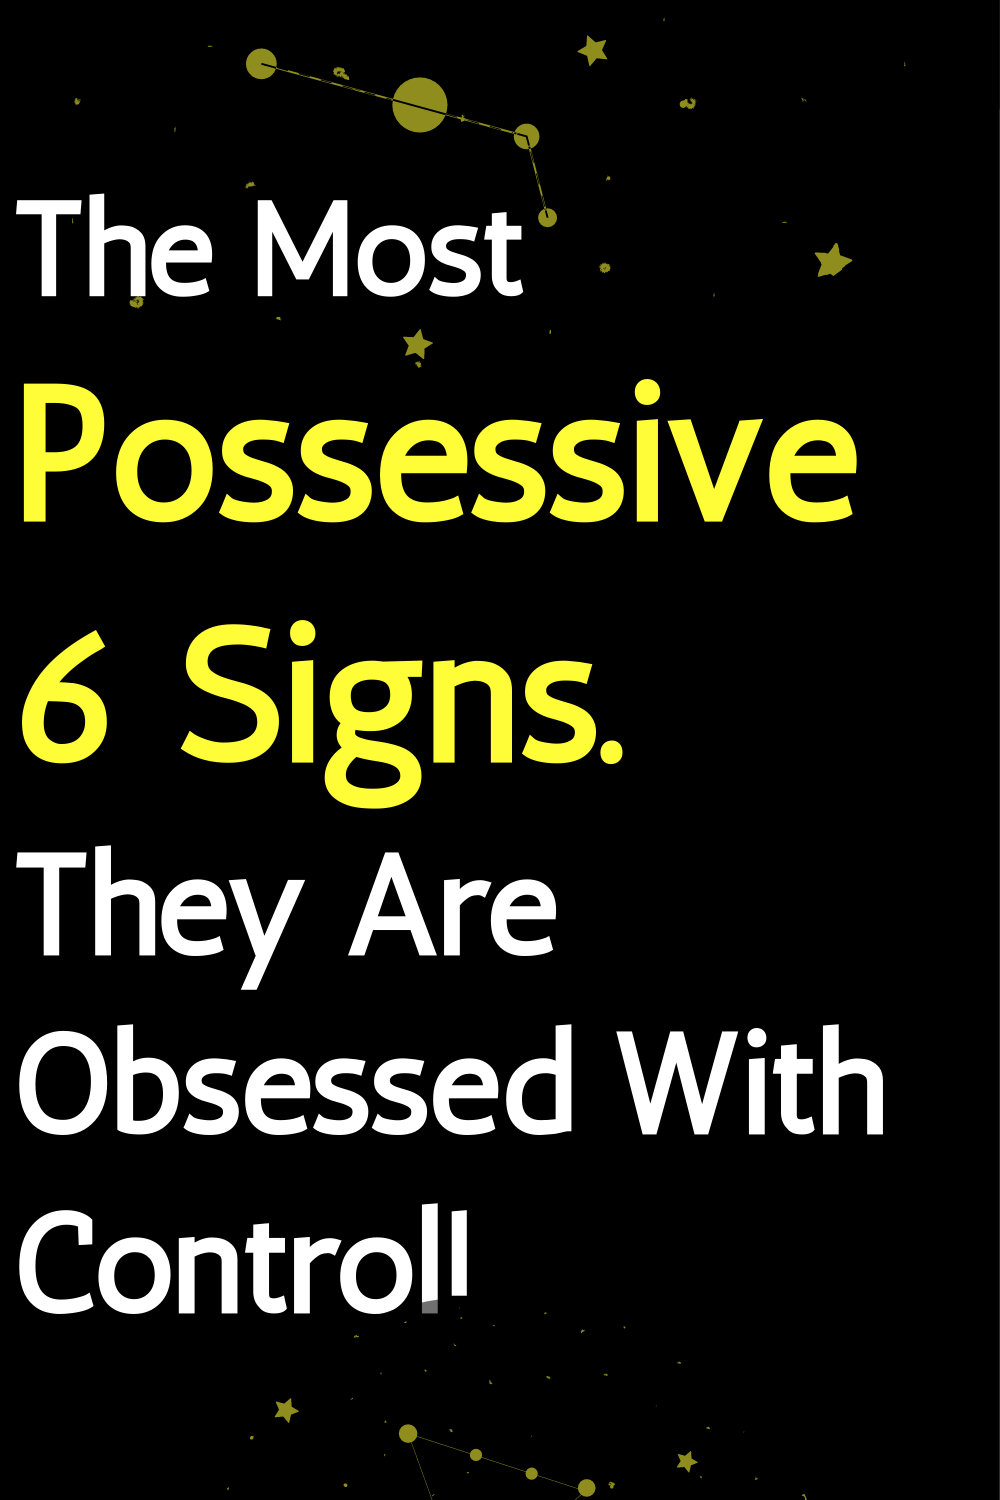 The Most Possessive 6 Signs. They Are Obsessed With Control!